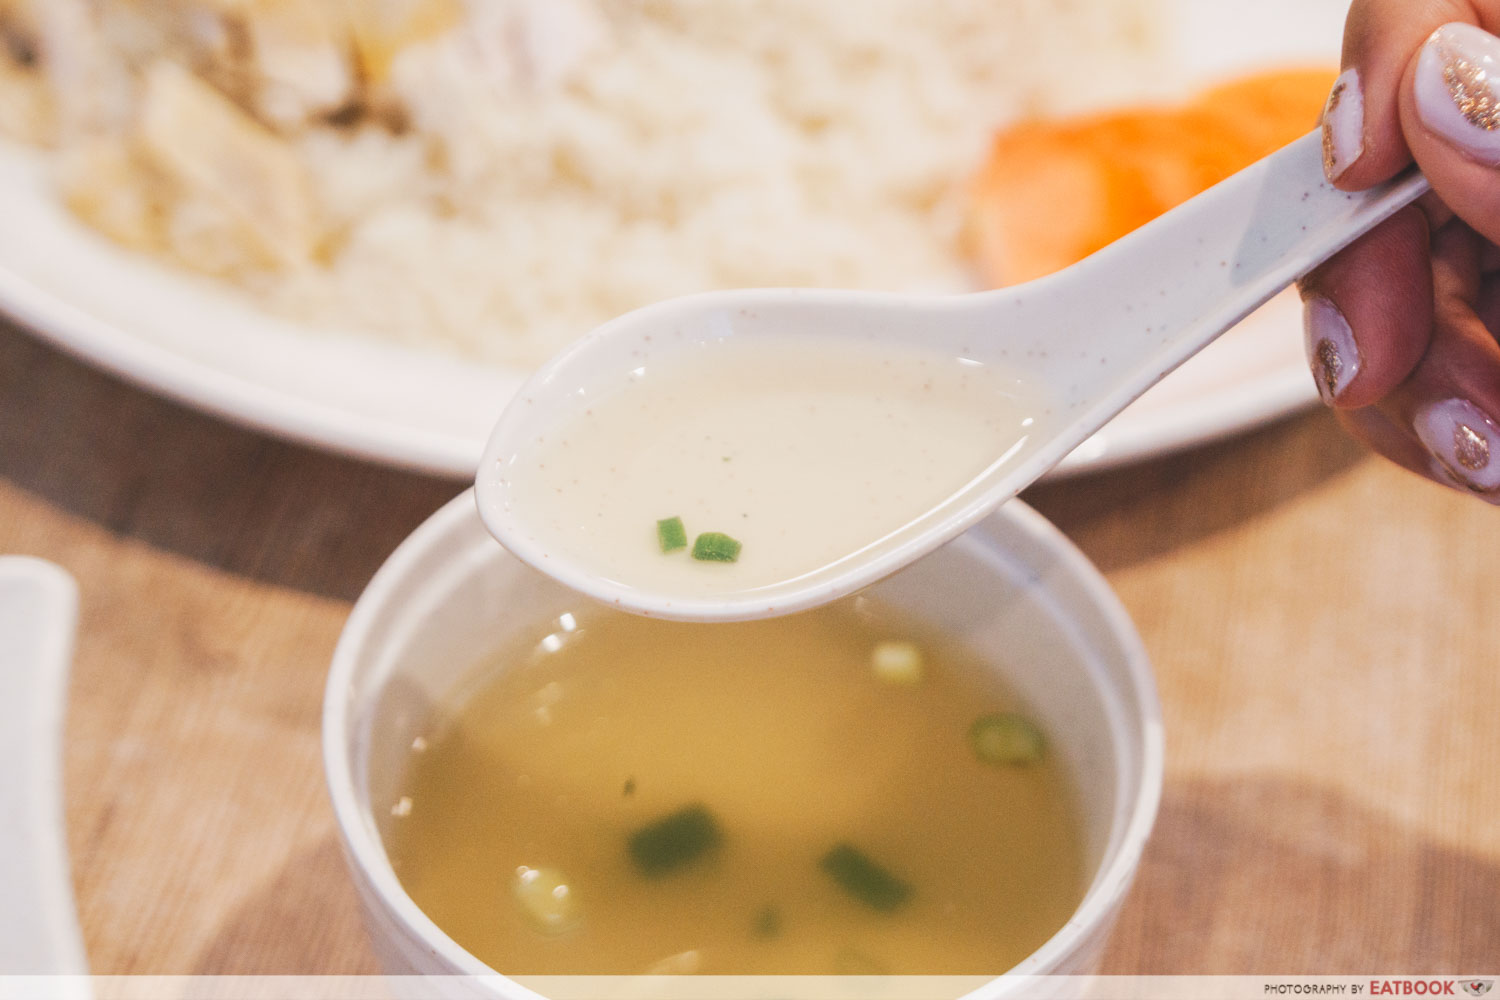 New Teck Kee Chicken Rice - soup